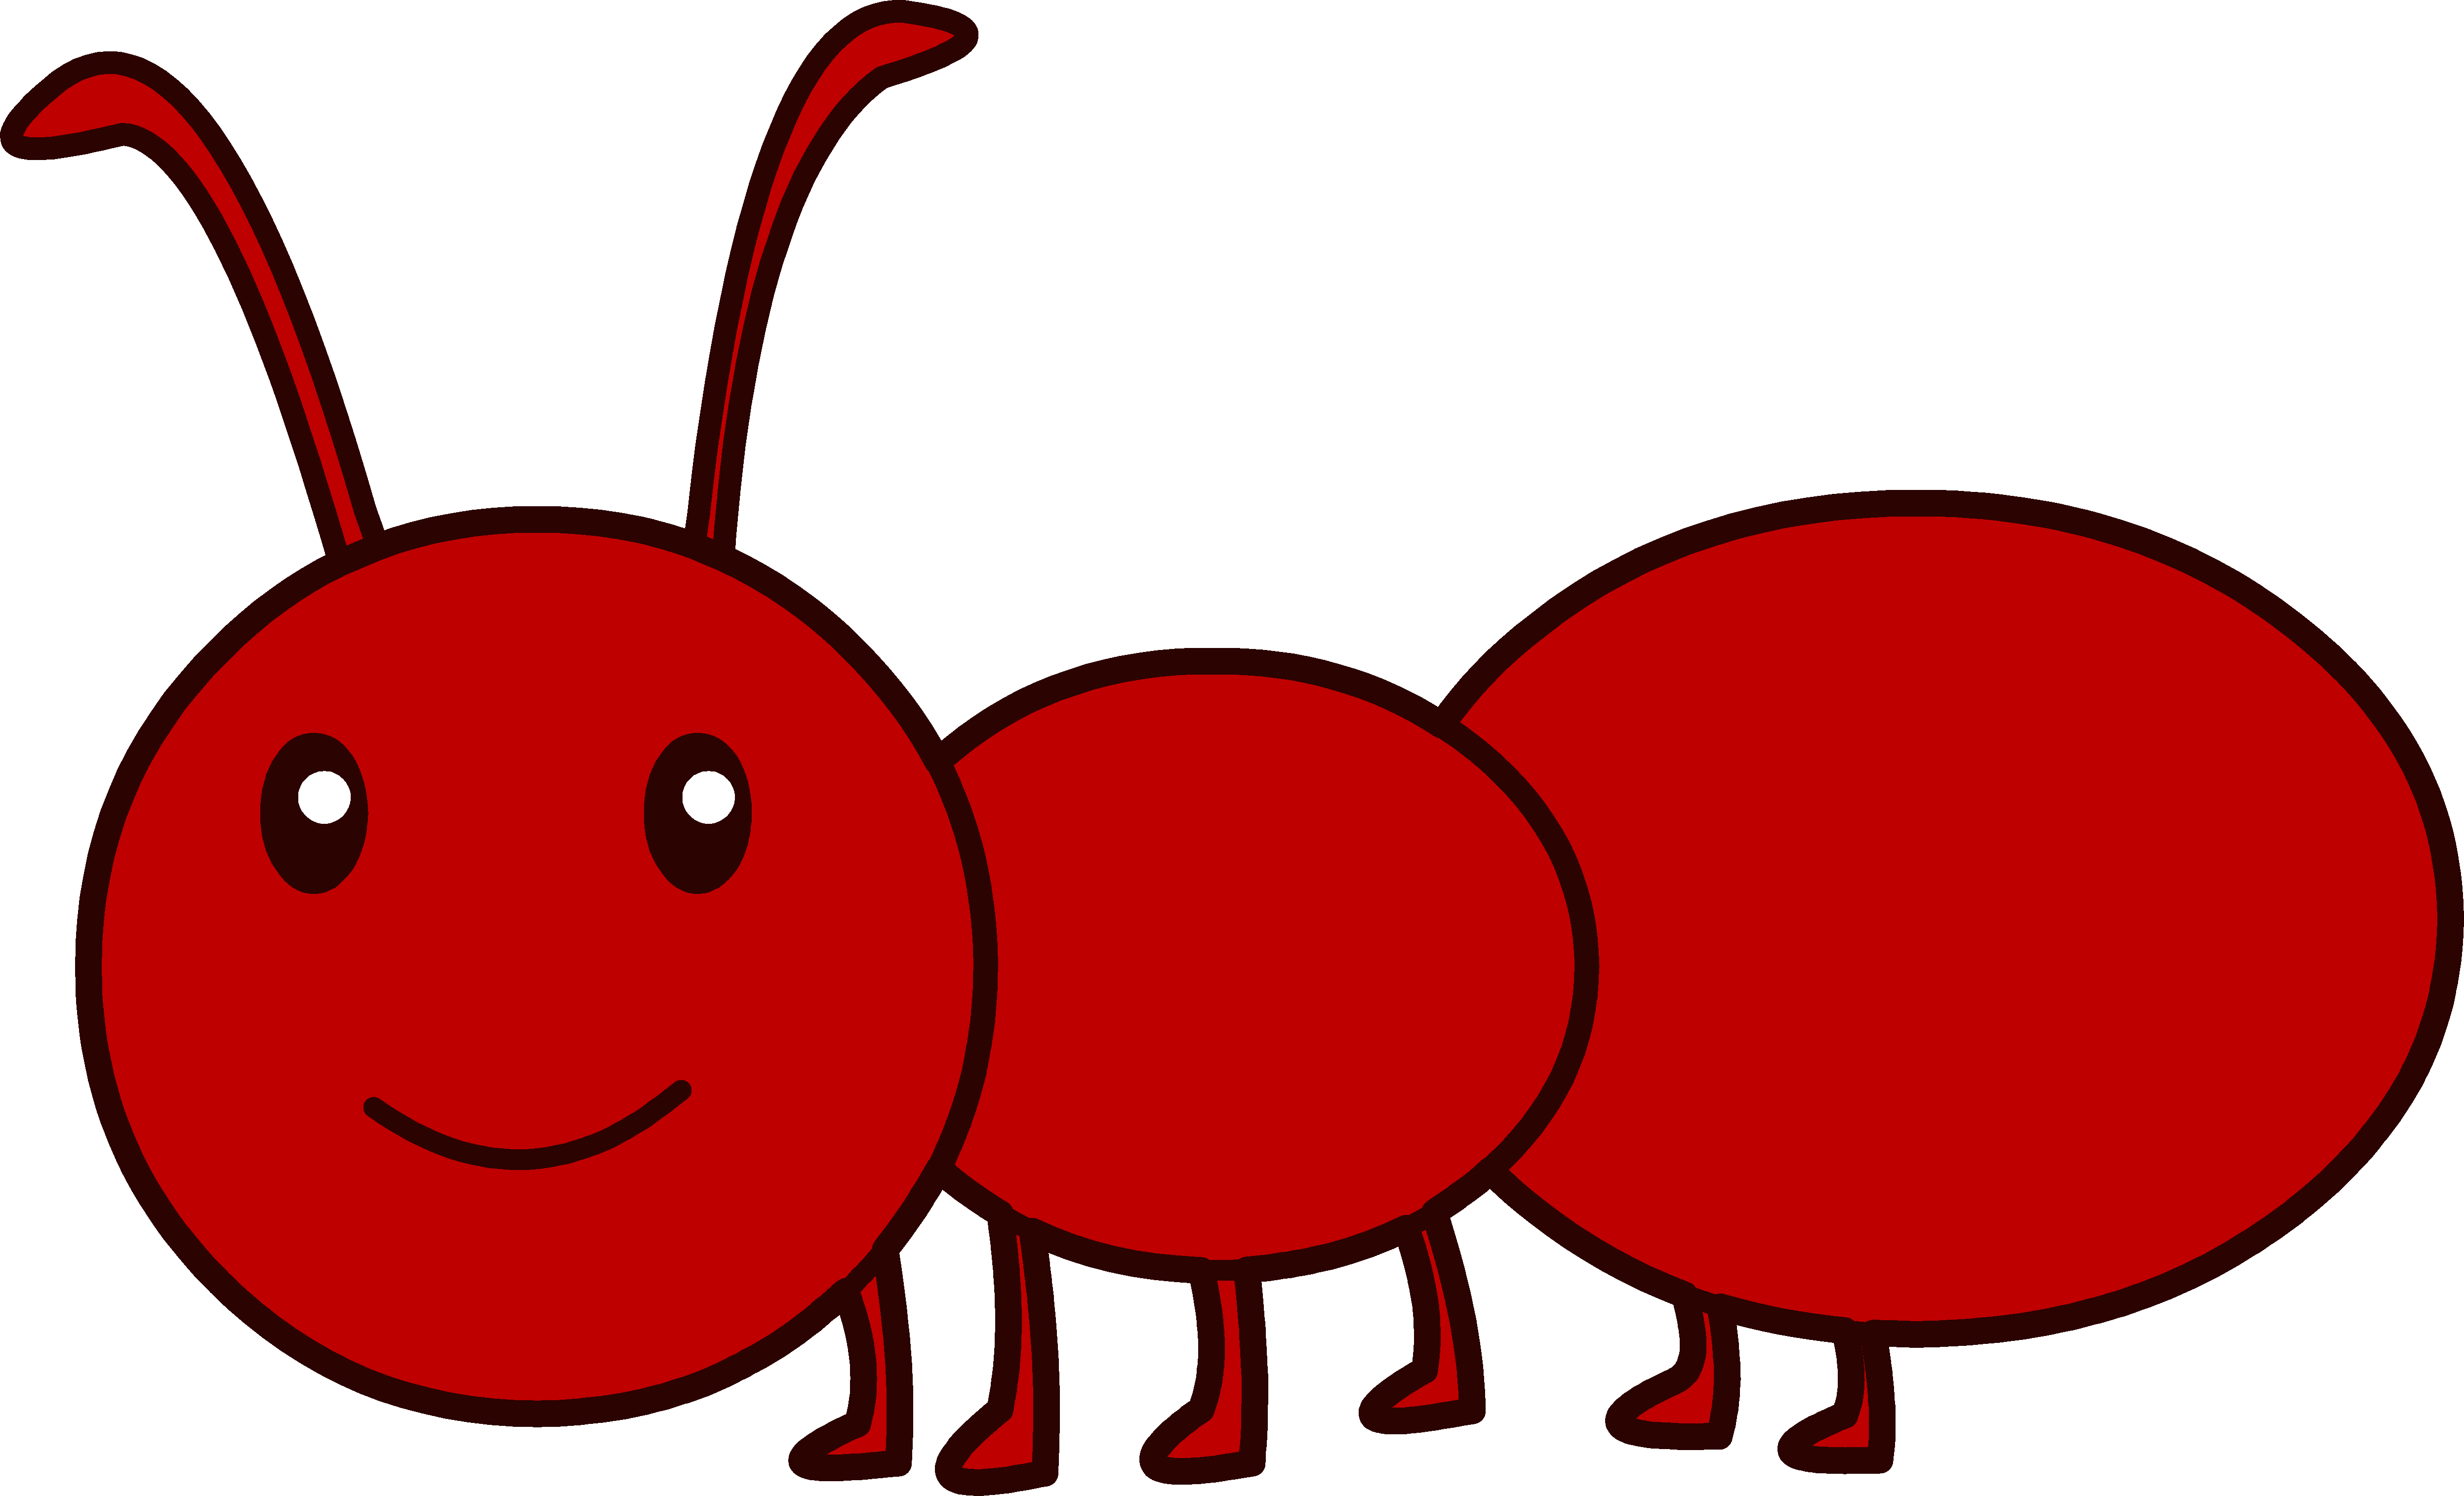 Ants clipart #15, Download drawings